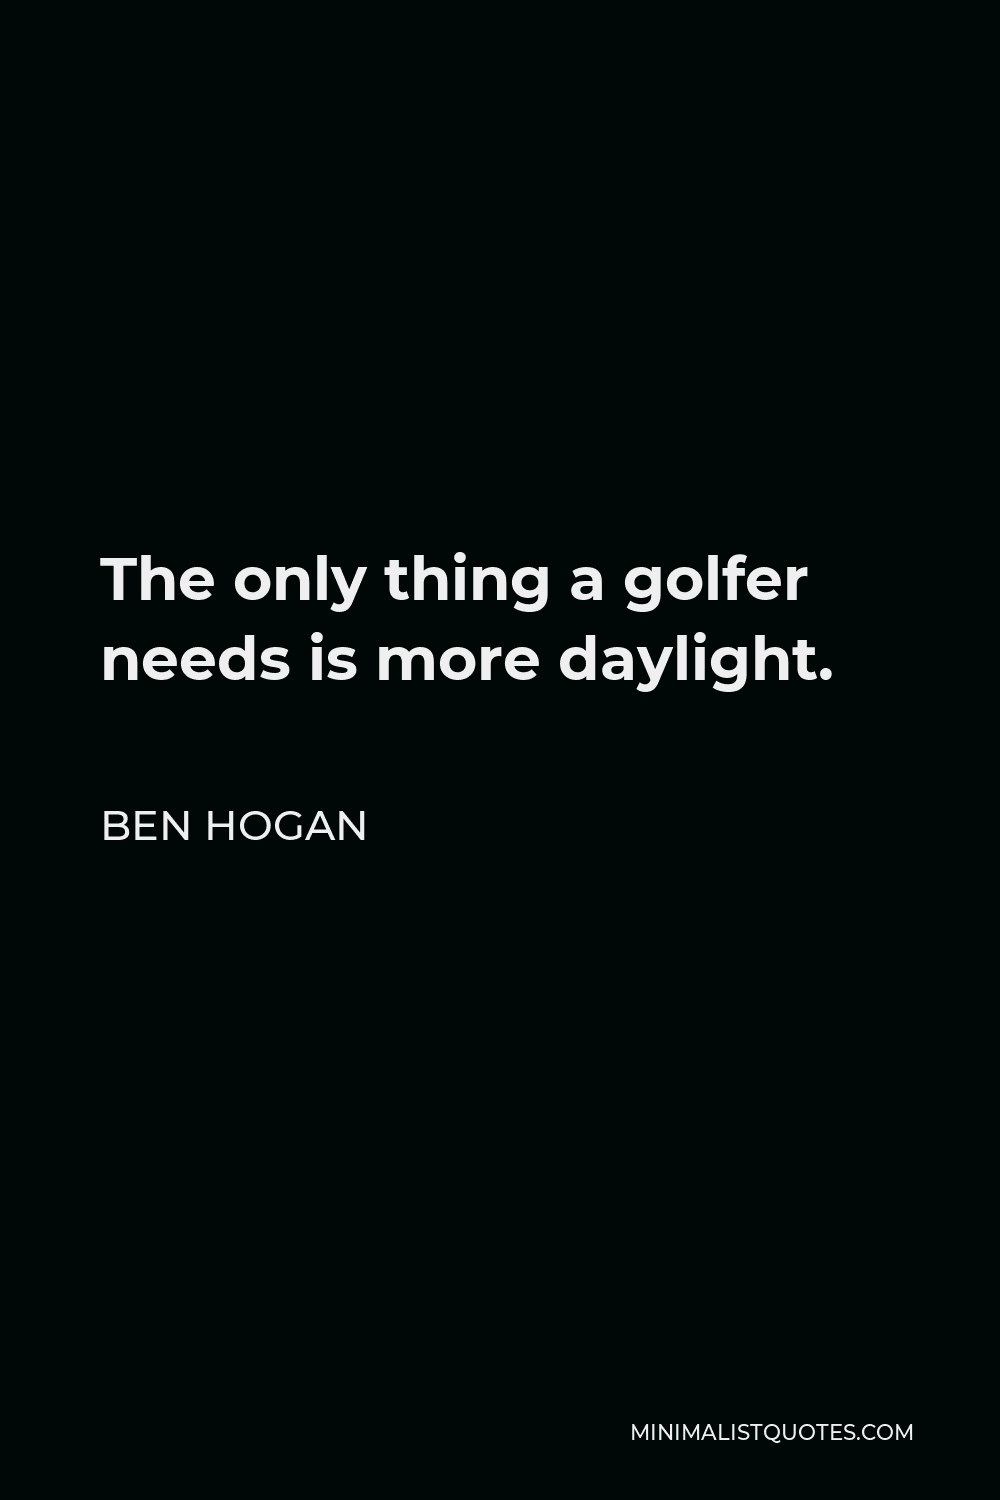 Ben Hogan Quote - The only thing a golfer needs is more daylight.